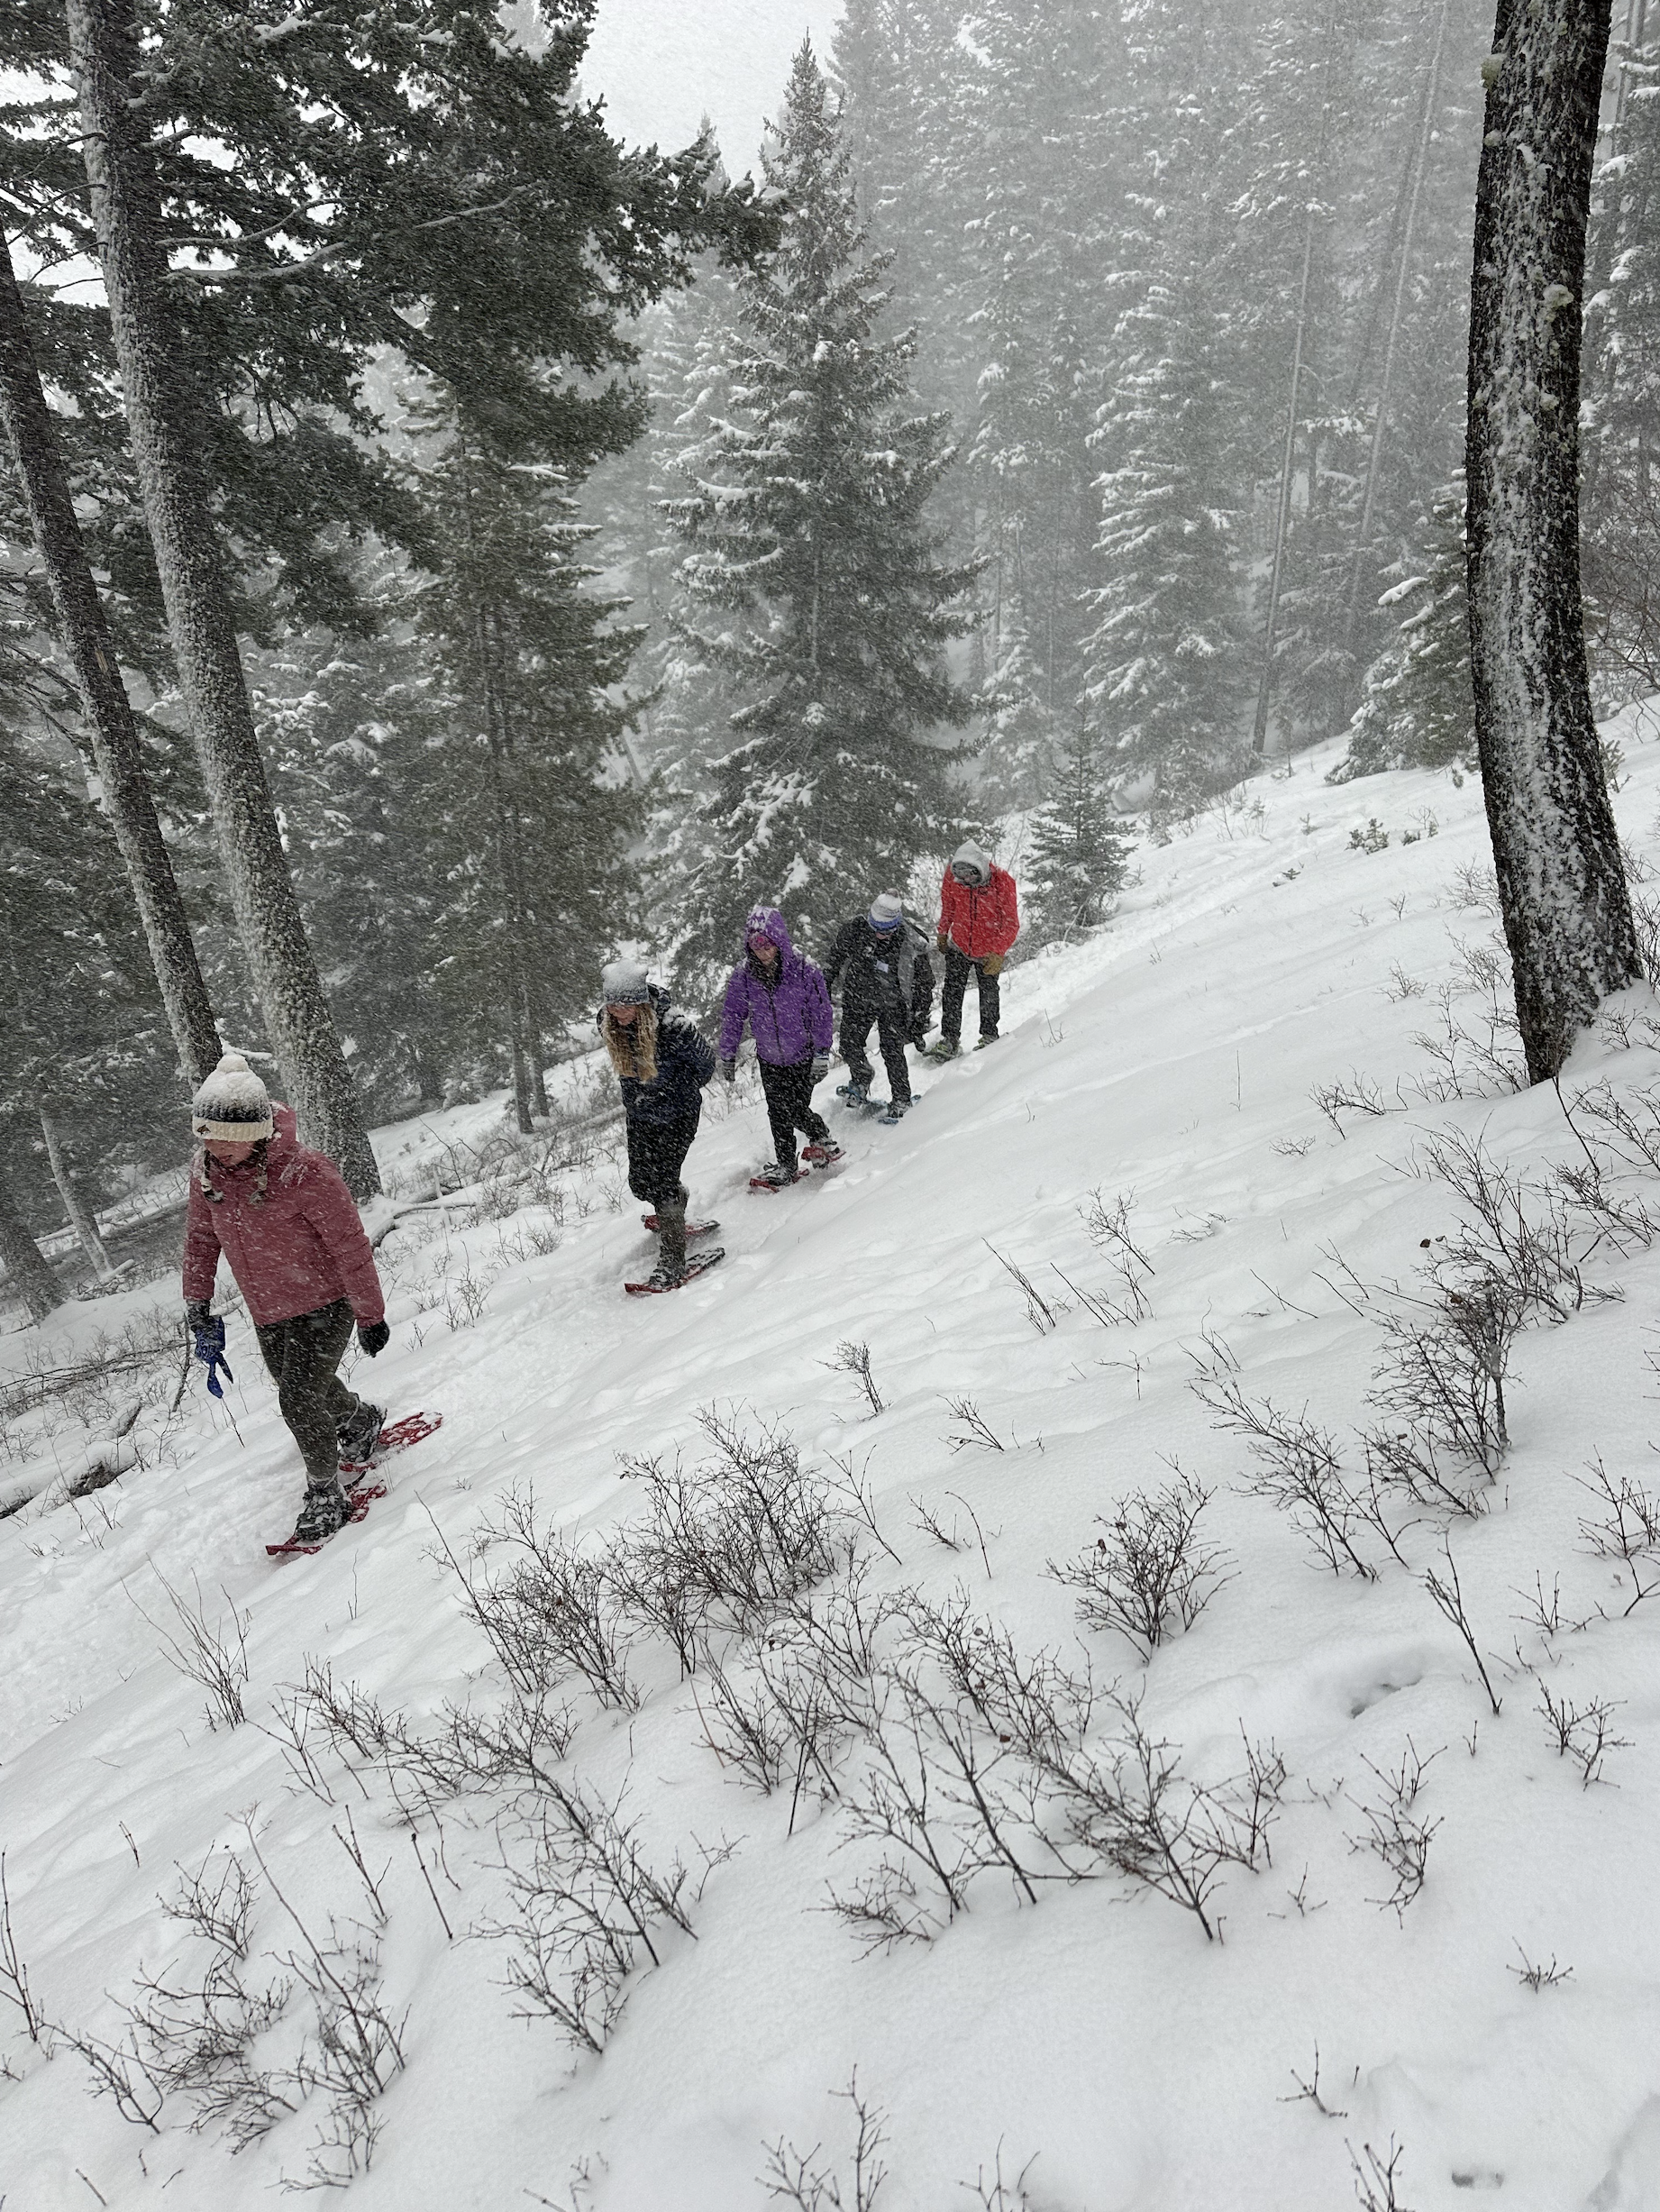 Students snow shoeing in a snowy mountain at the winter leafdership summit 